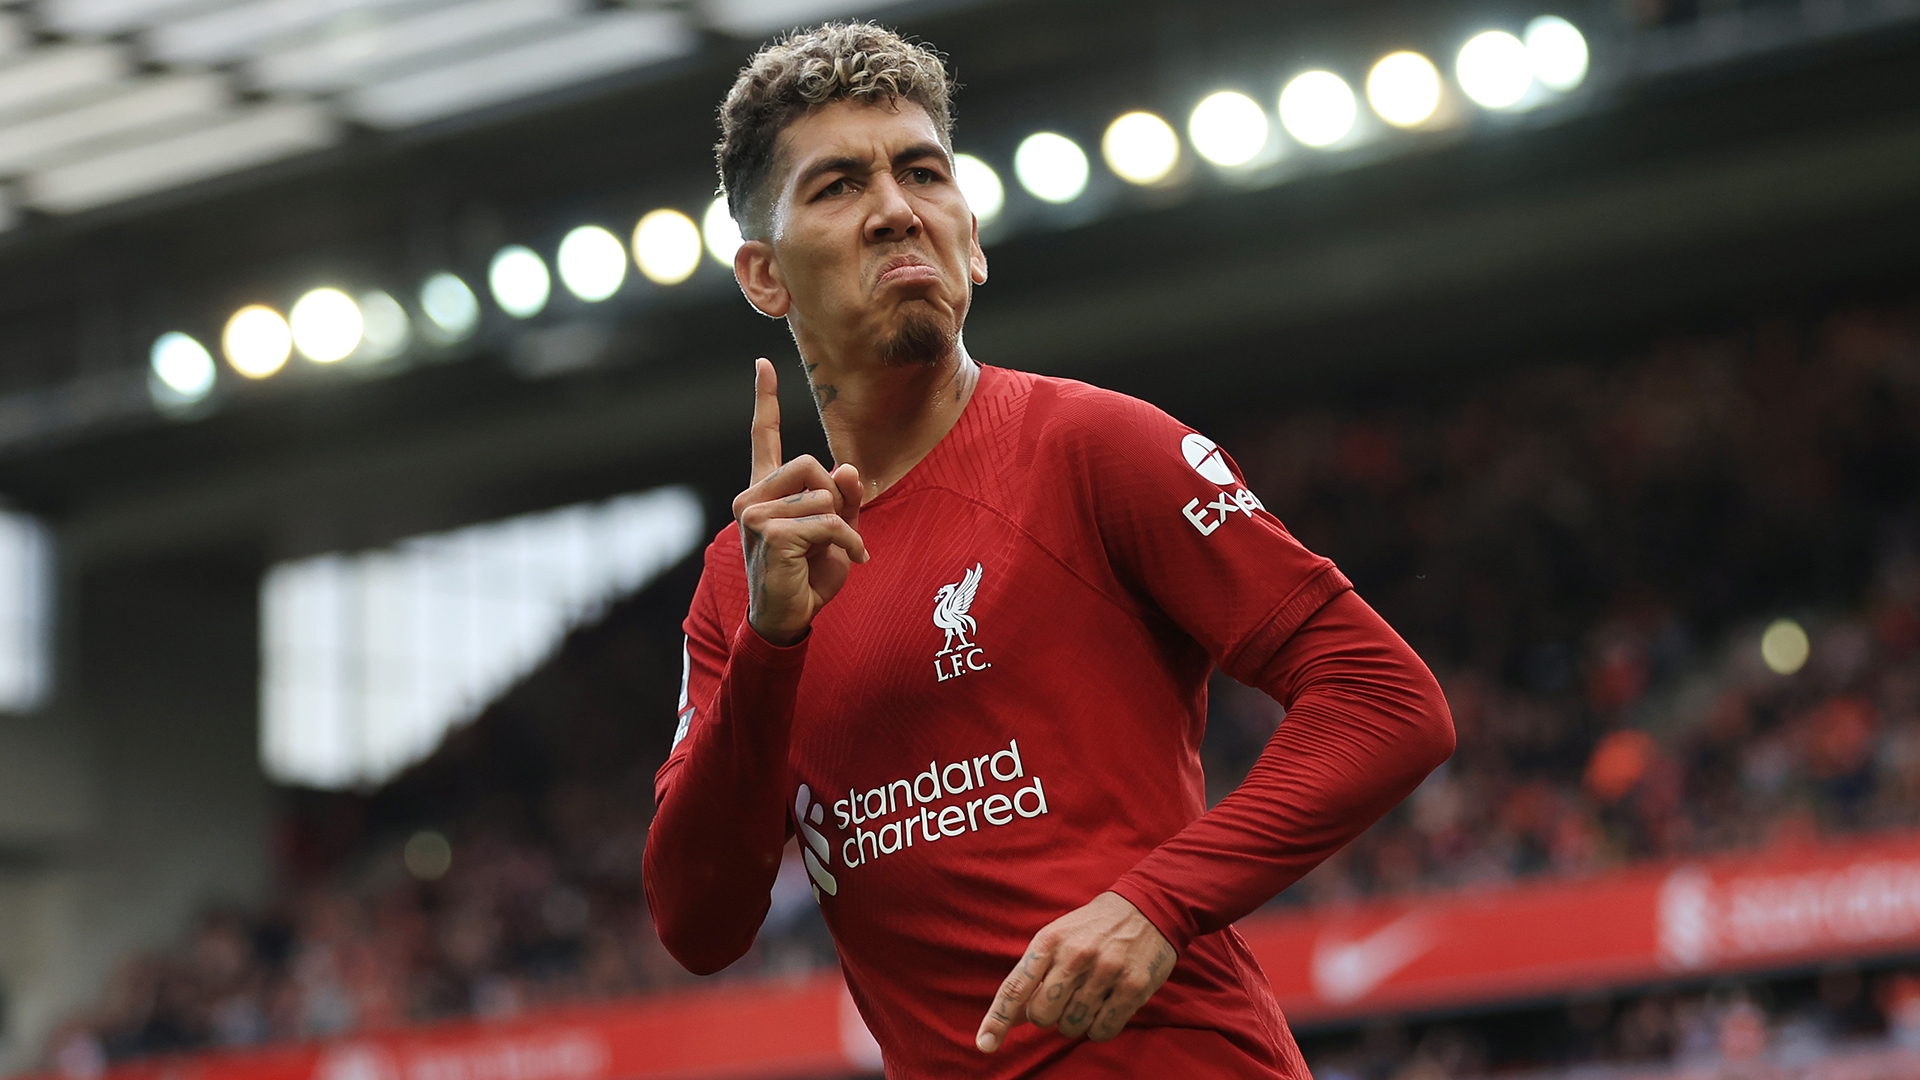 Liverpool's , Klopp's  - Firmino is back in form and as important  as ever but will he get a new contract? 